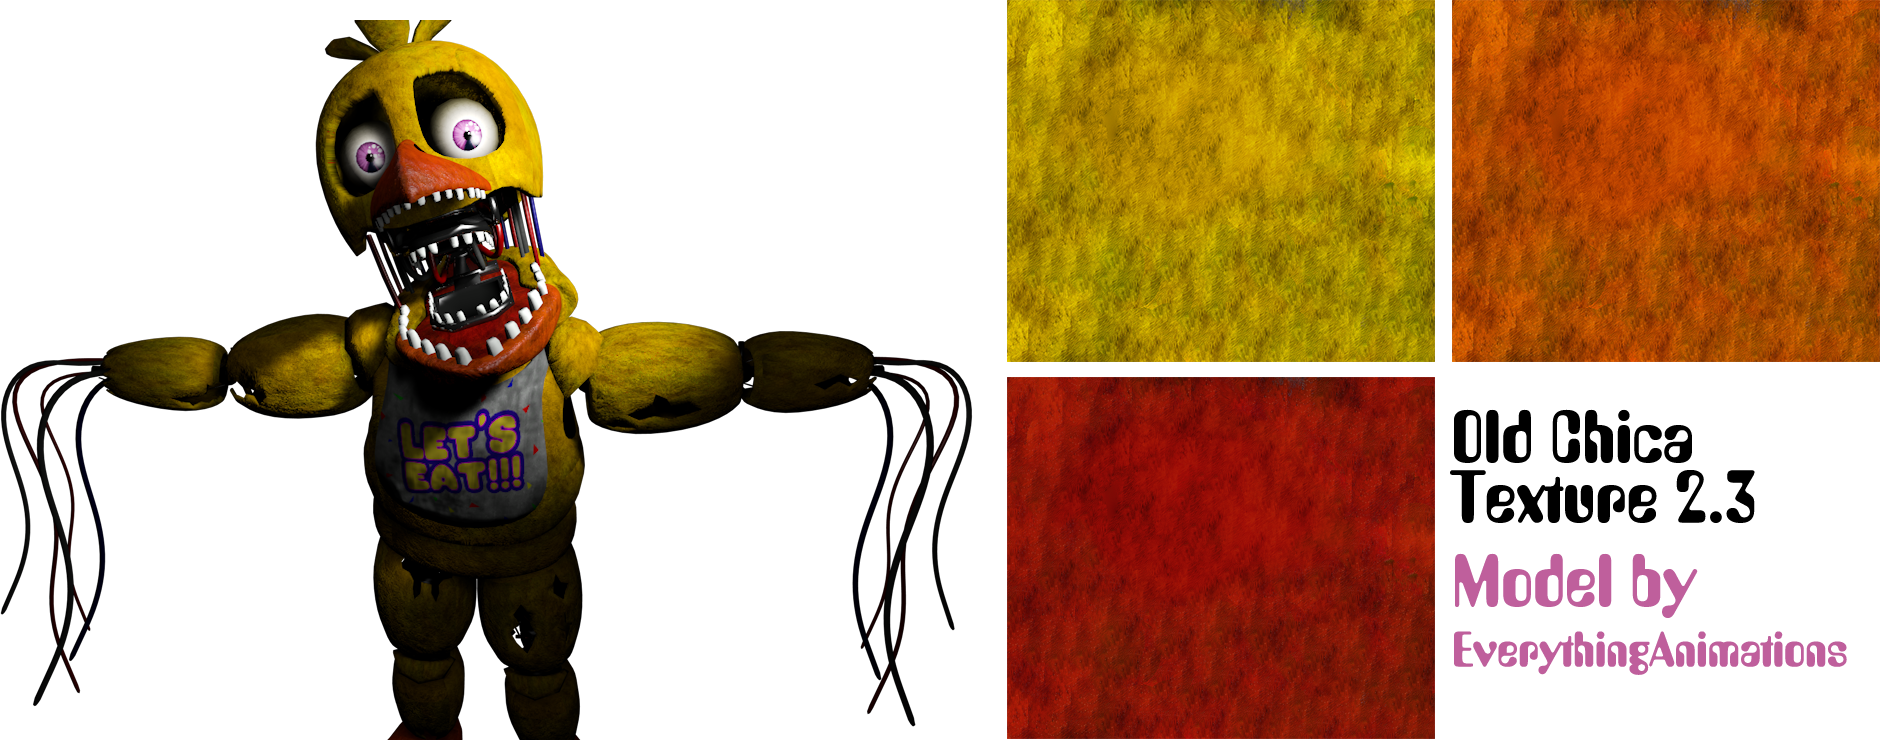 Withered Chica Suit Textures by DiscoHeadOfficial on DeviantArt